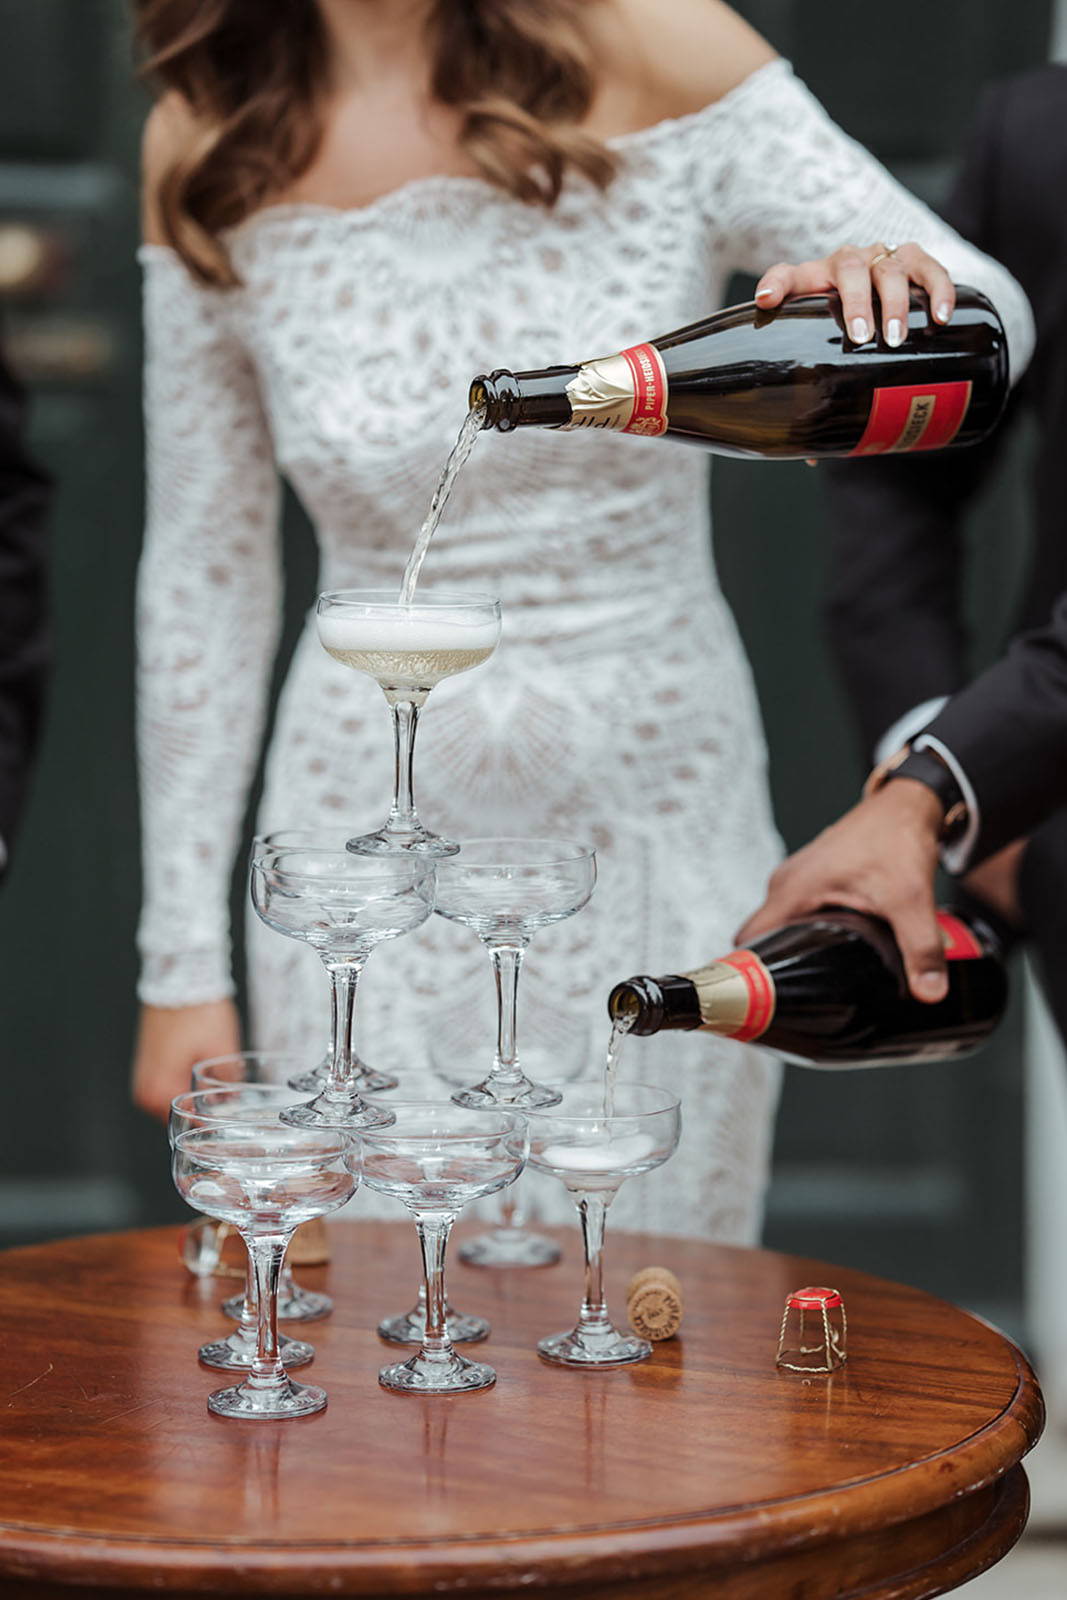 Bride and groom, serving champagne coupes